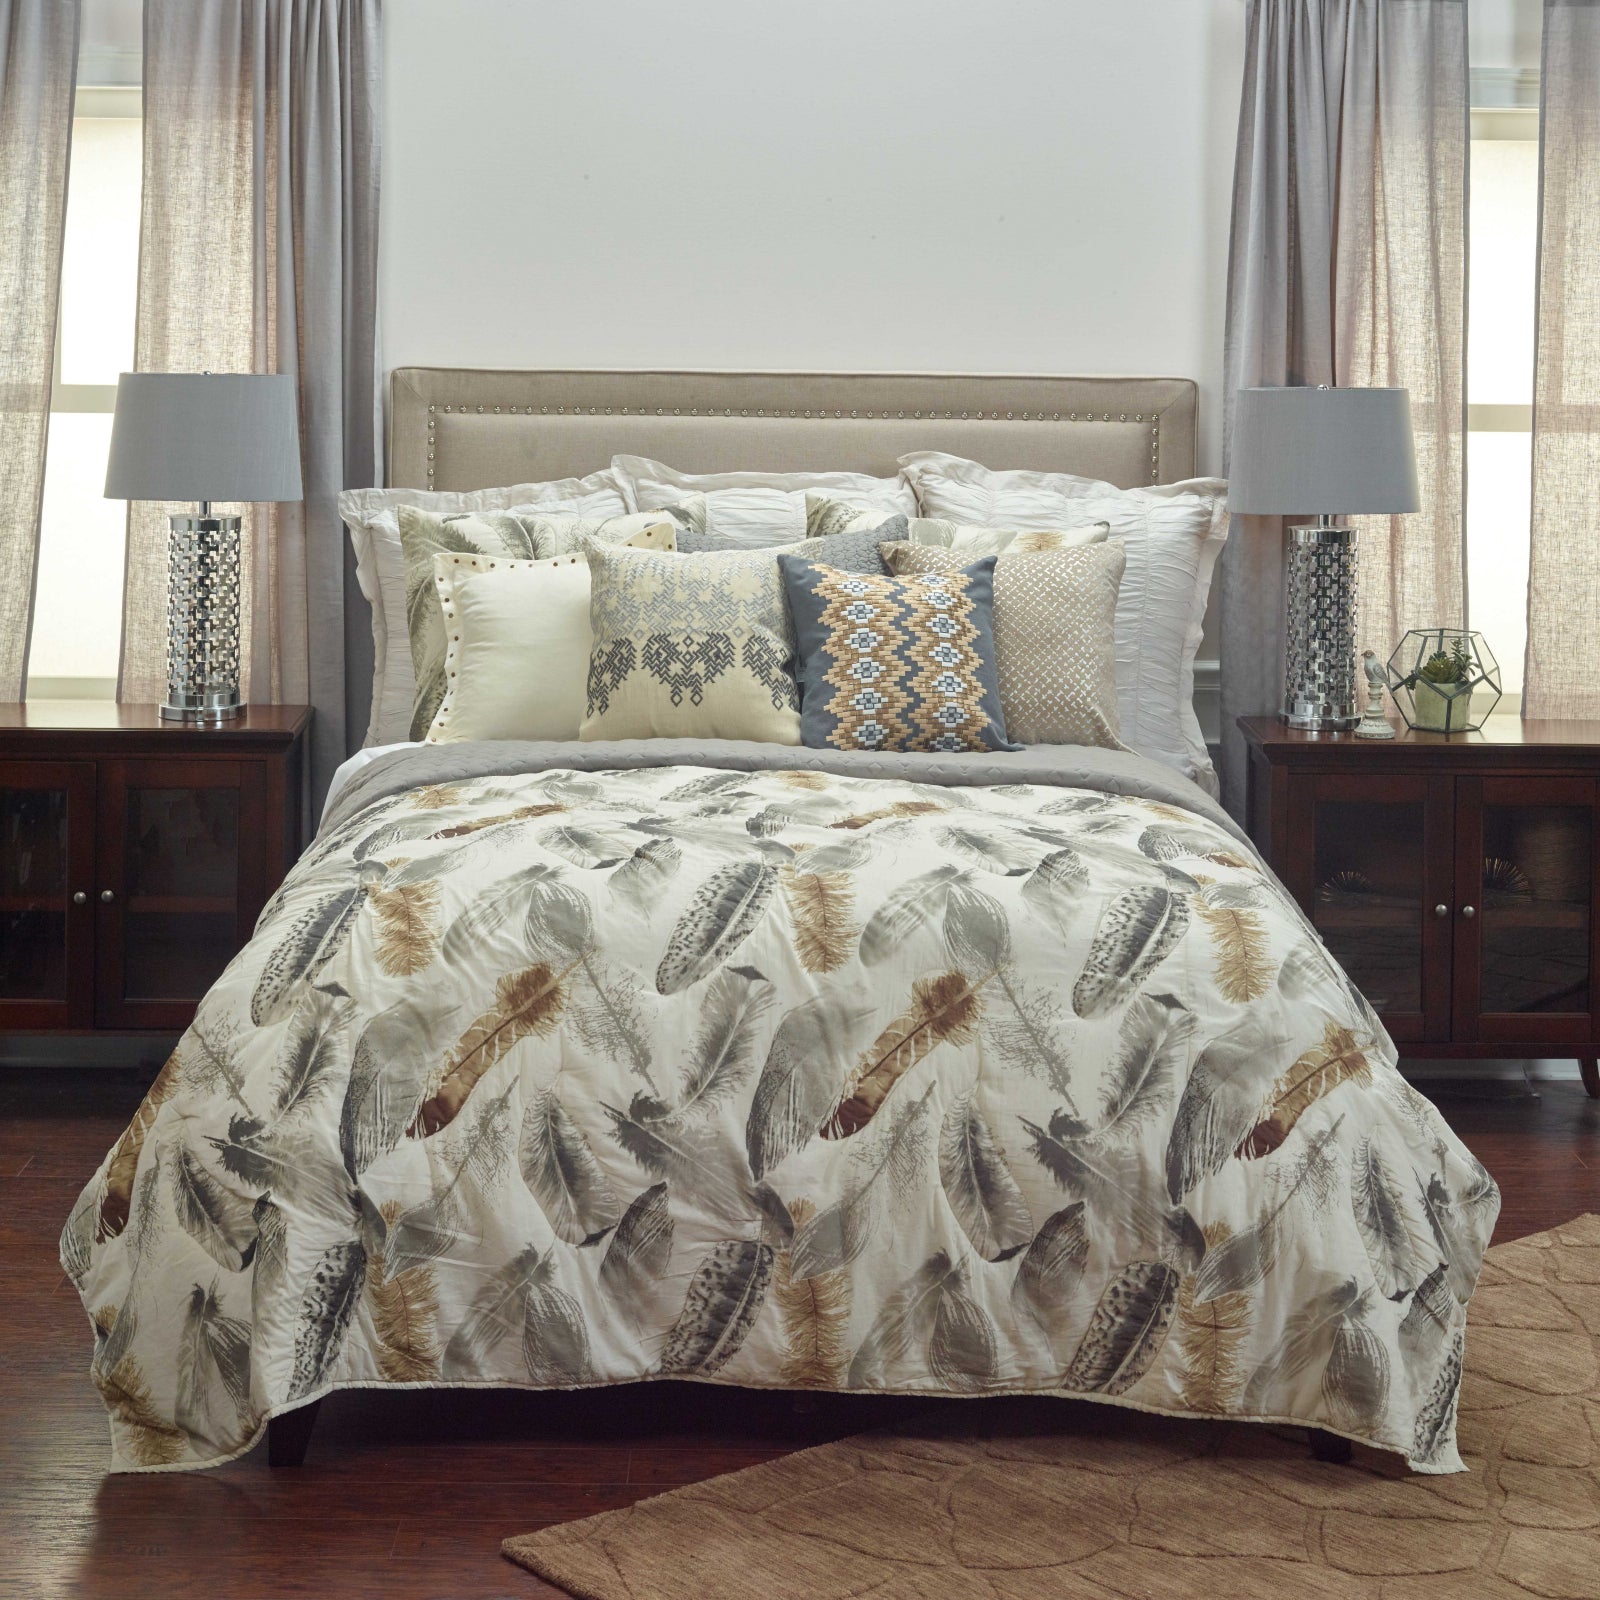 Rizzy BT3181 Feathered Nest Beige Bedding main image